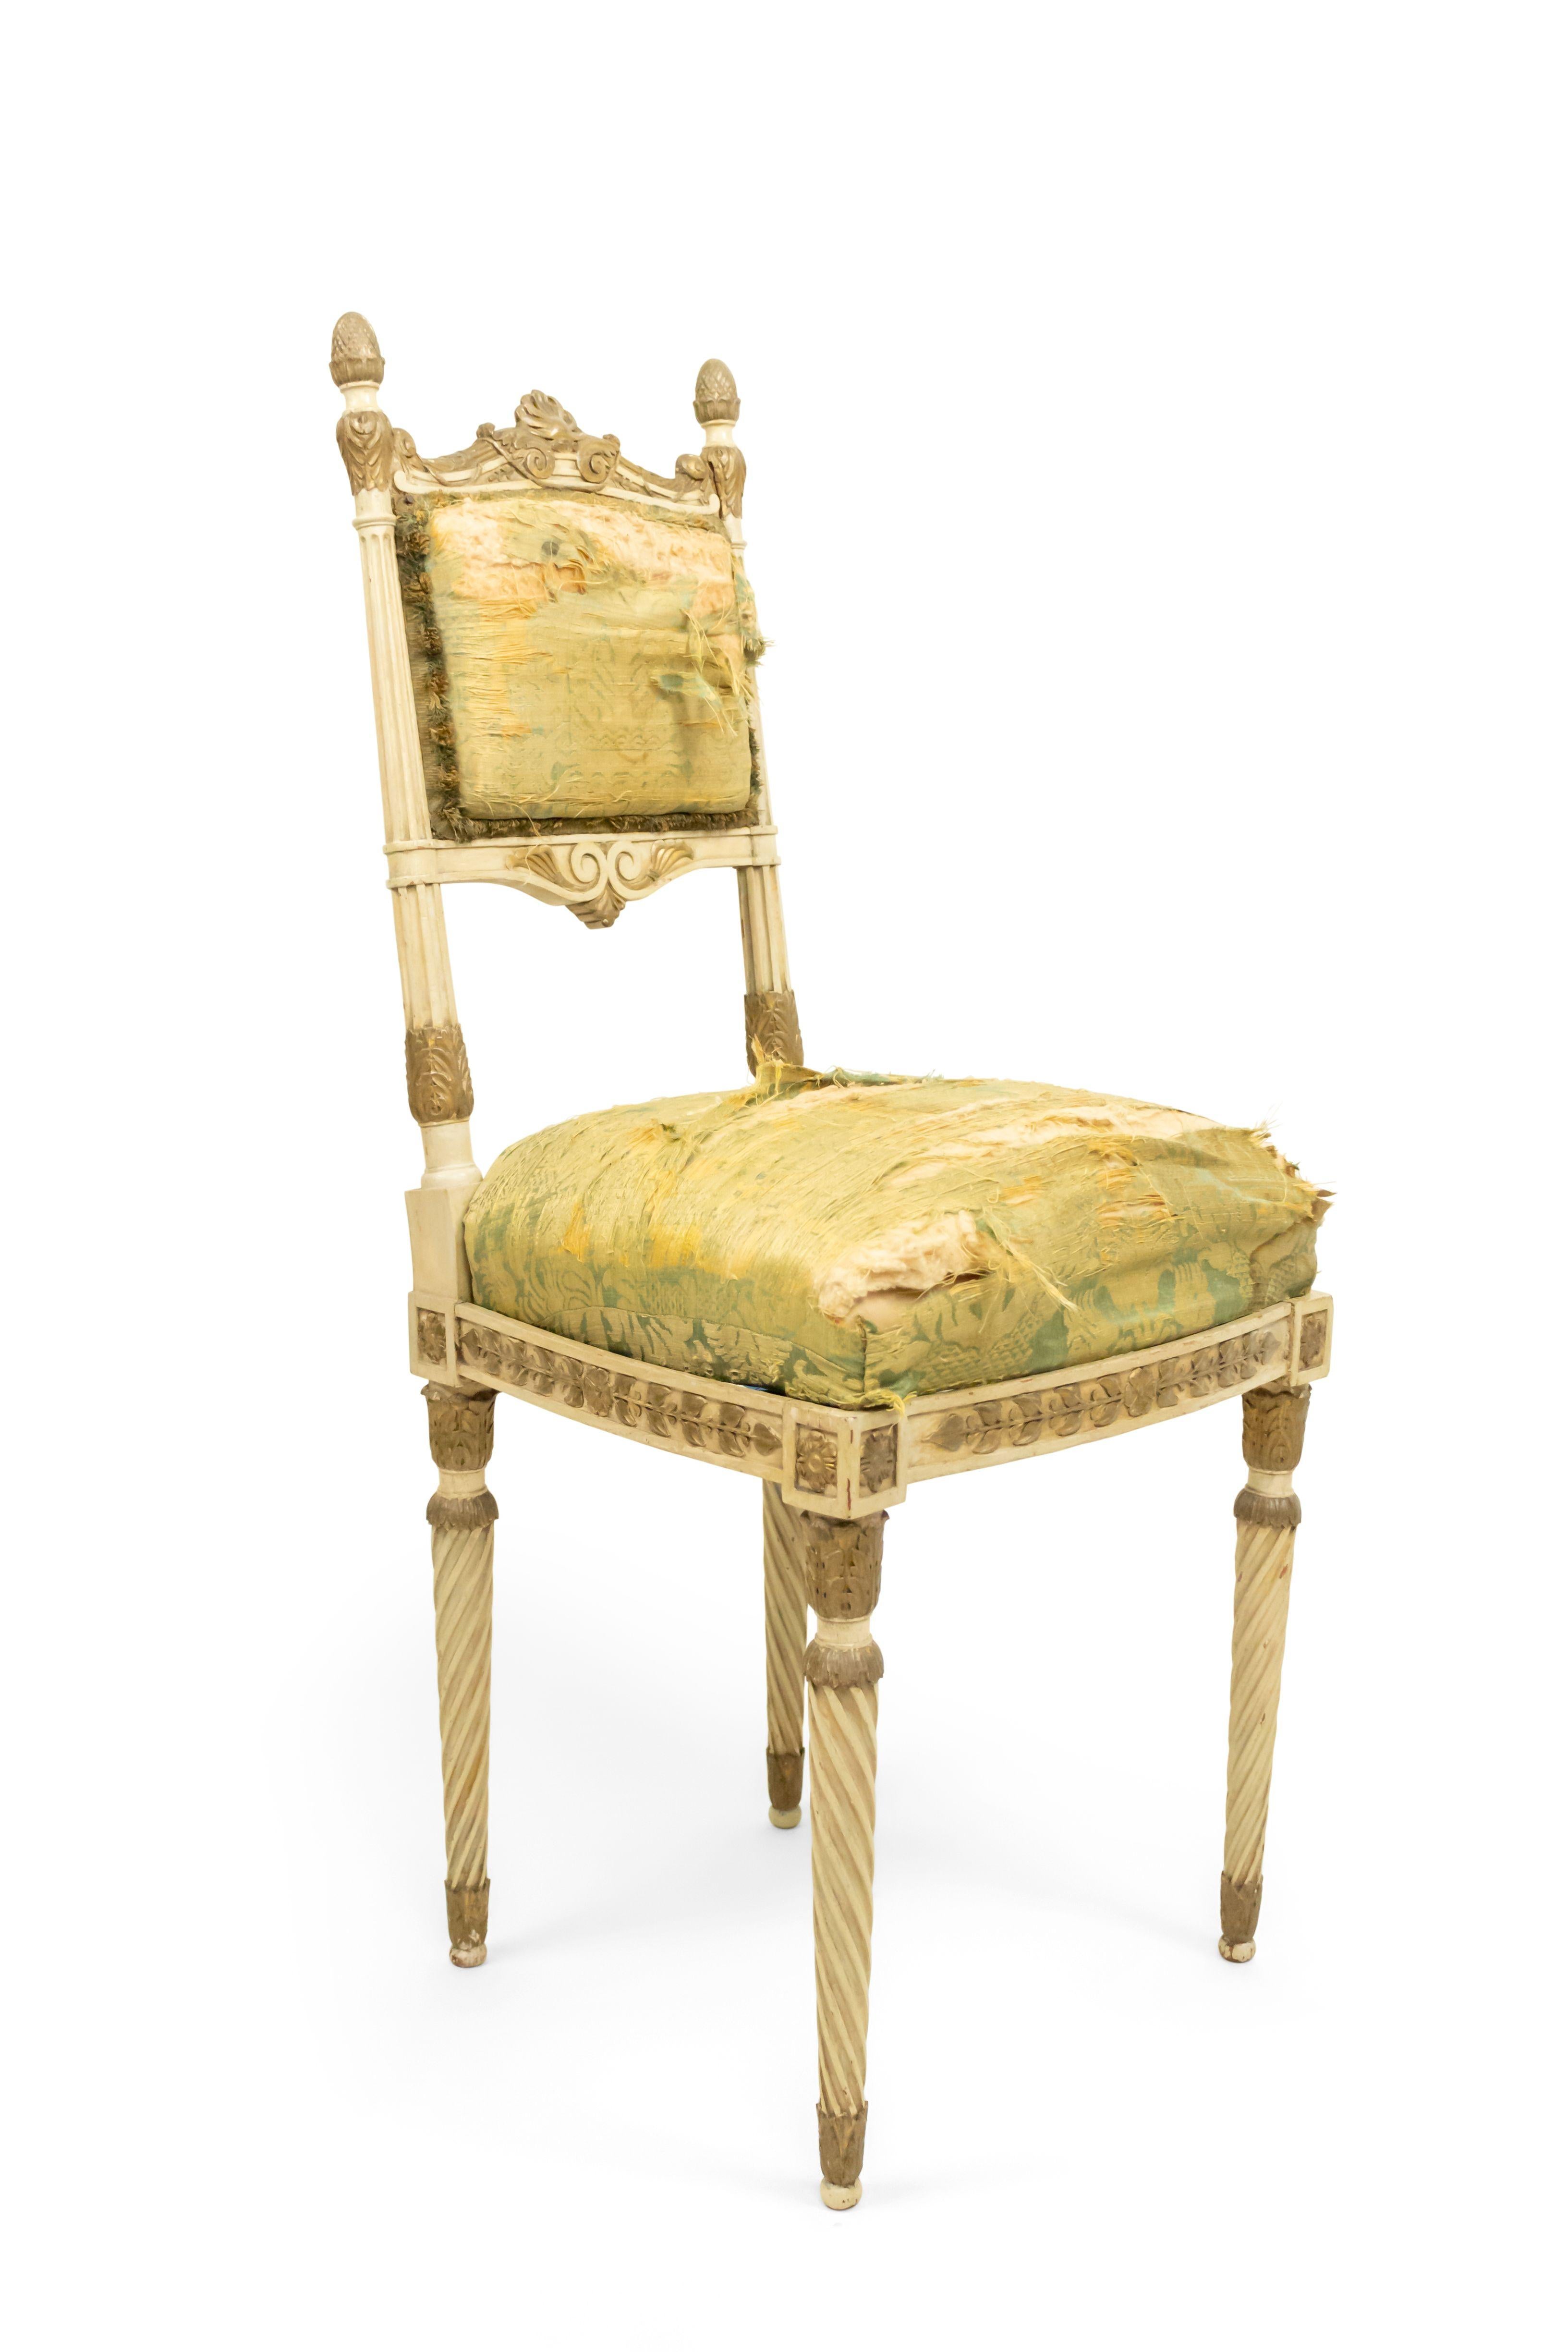 19th Century Set of 4 Italian Neoclassic Silk Upholstery Chairs For Sale